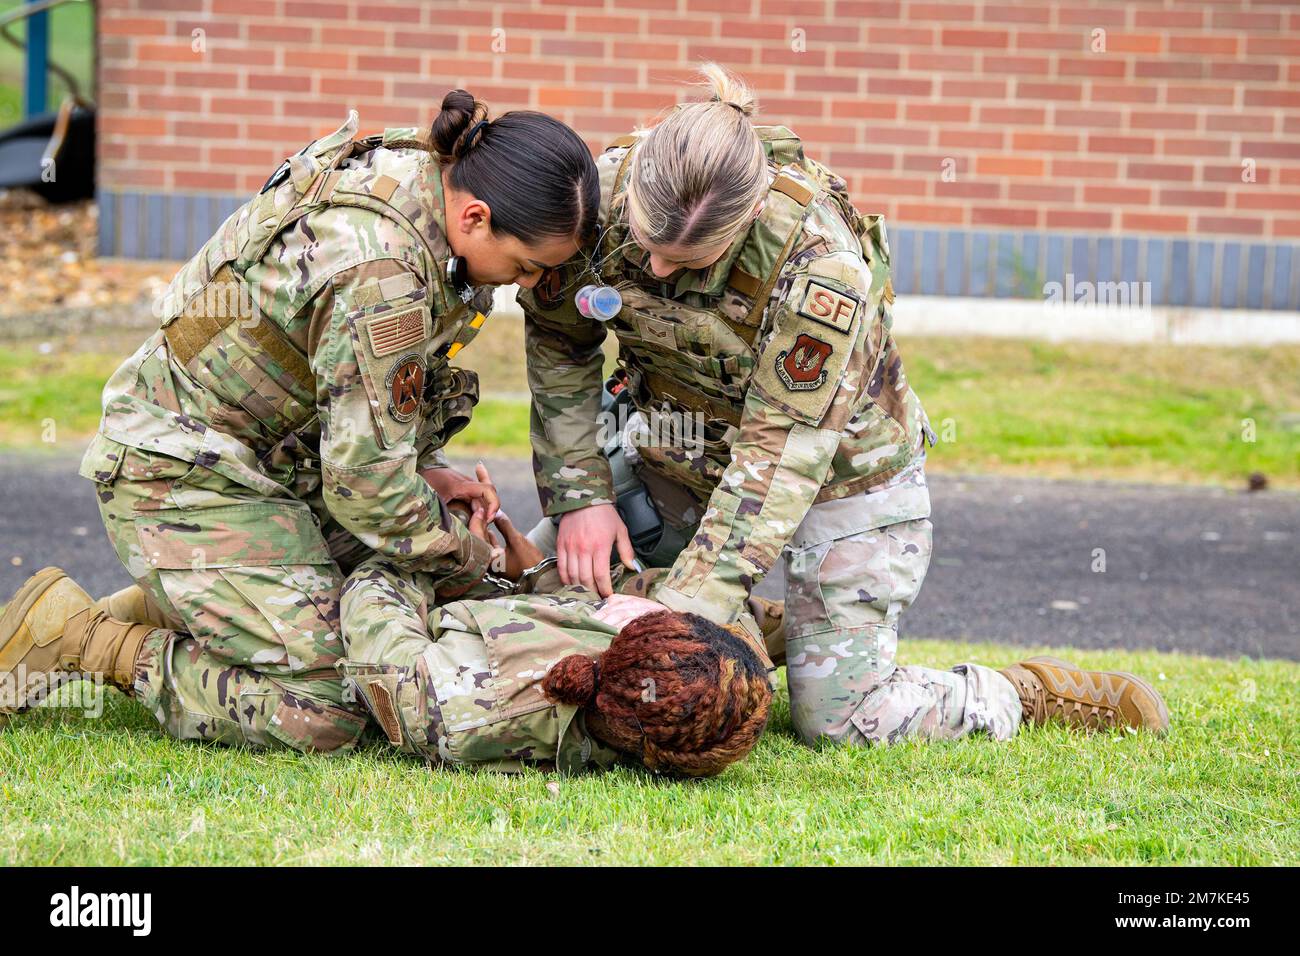 Airman 1st Class Helen Lopez, left, 423d Security Forces Squadron installation patrolman, and Airman 1st Class Sierra Capobianco, base defense operations center controller, demonstrate apprehending a suspect at RAF Molesworth, England, May 10, 2022. The 423d SFS taught students from Huntingdon’s St. Peter’s school about weapons safety and self defense techniques as part of a mentorship program aimed at strengthening the relationship between the 501st Combat Support Wing and local community. Stock Photo